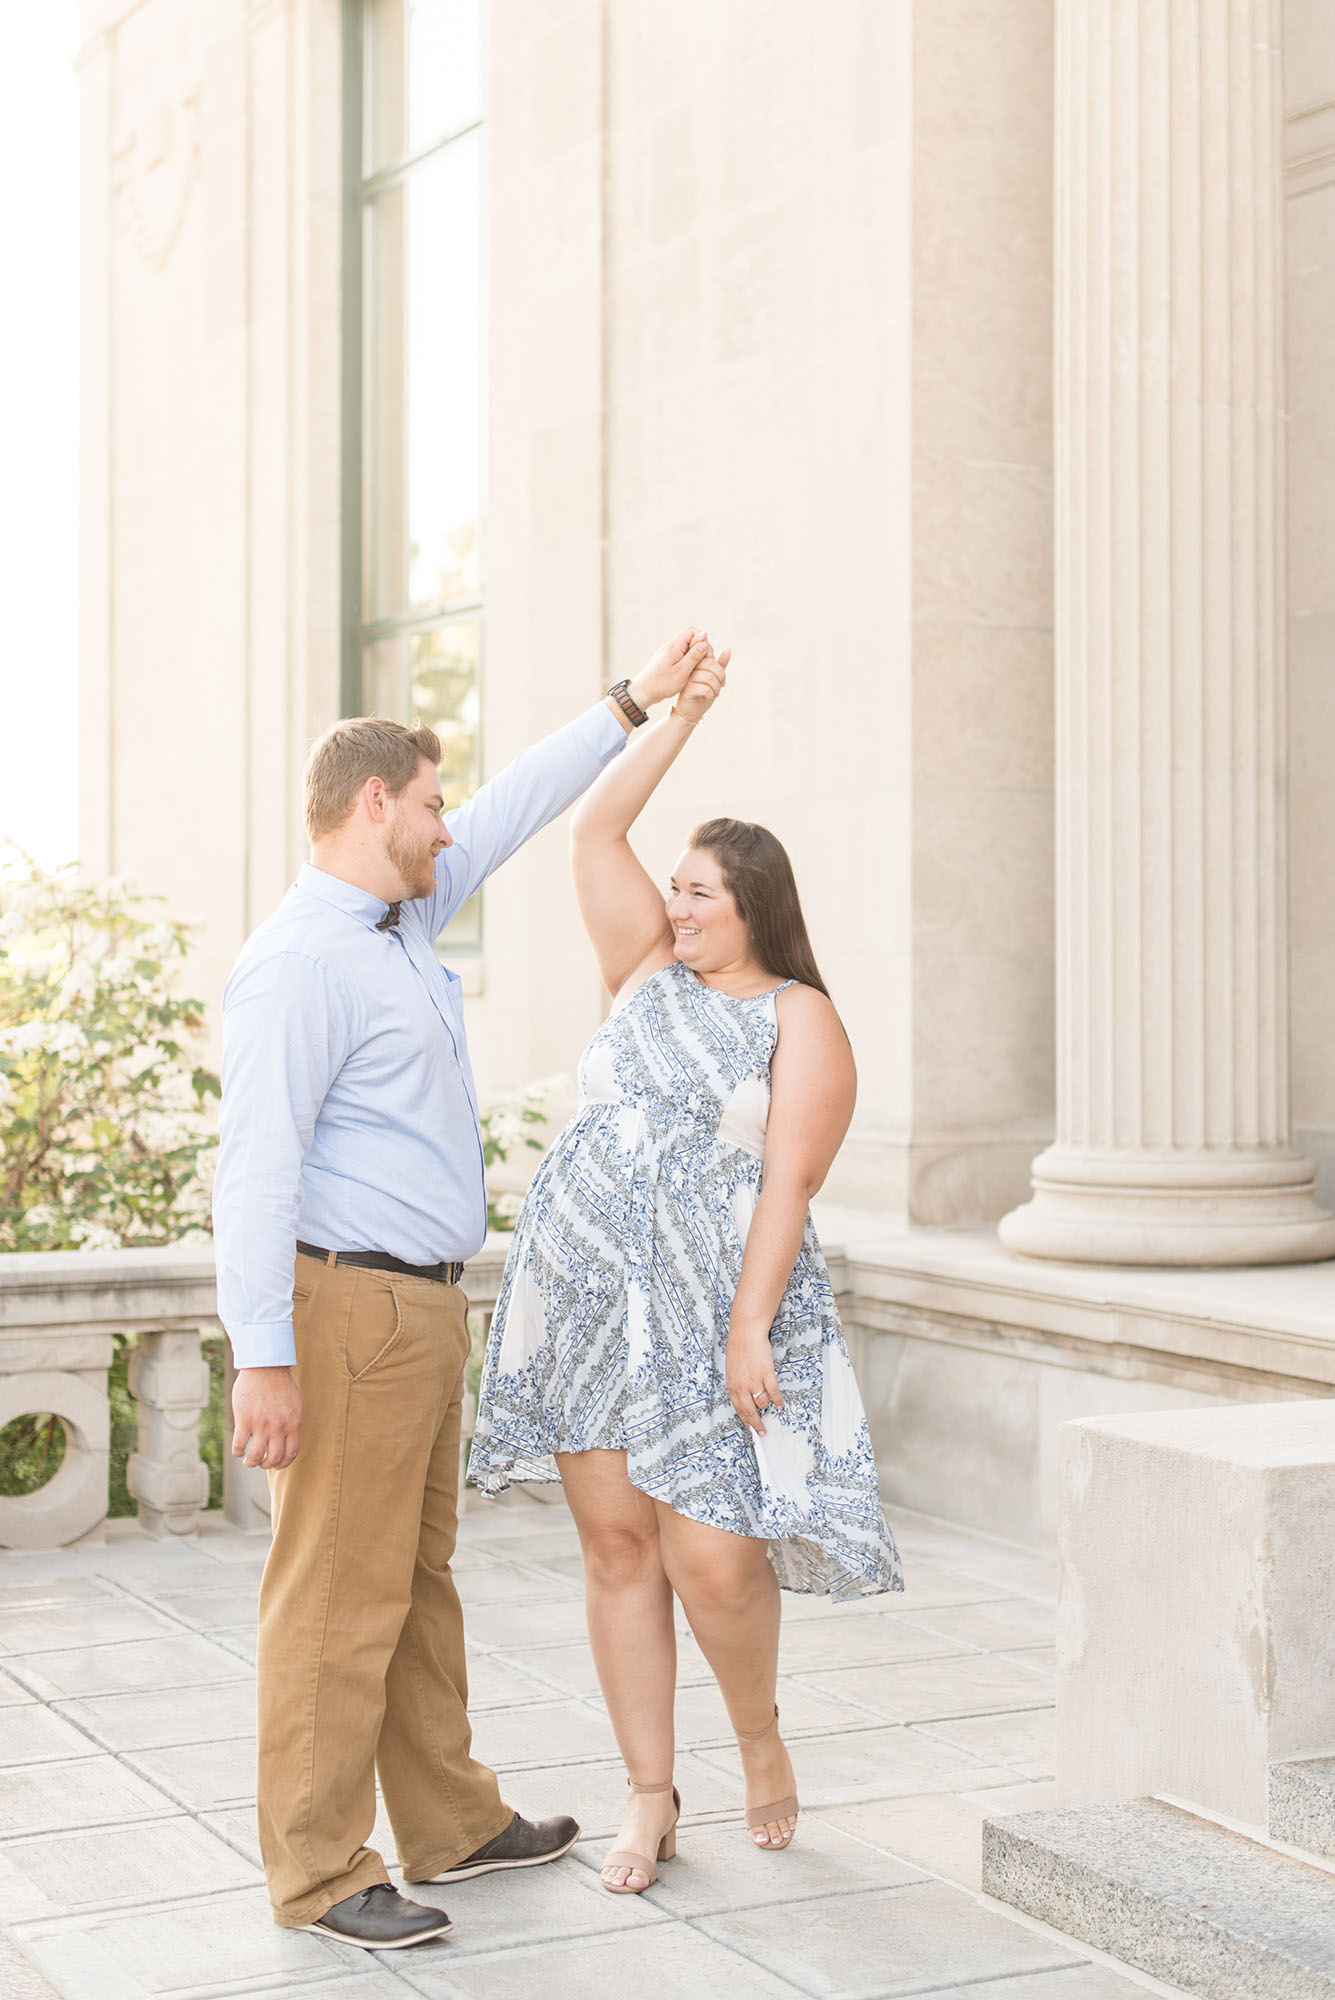 Couple dances downtown during engagement photos by Indianapolis wedding photographer Victoria Rayburn Photography